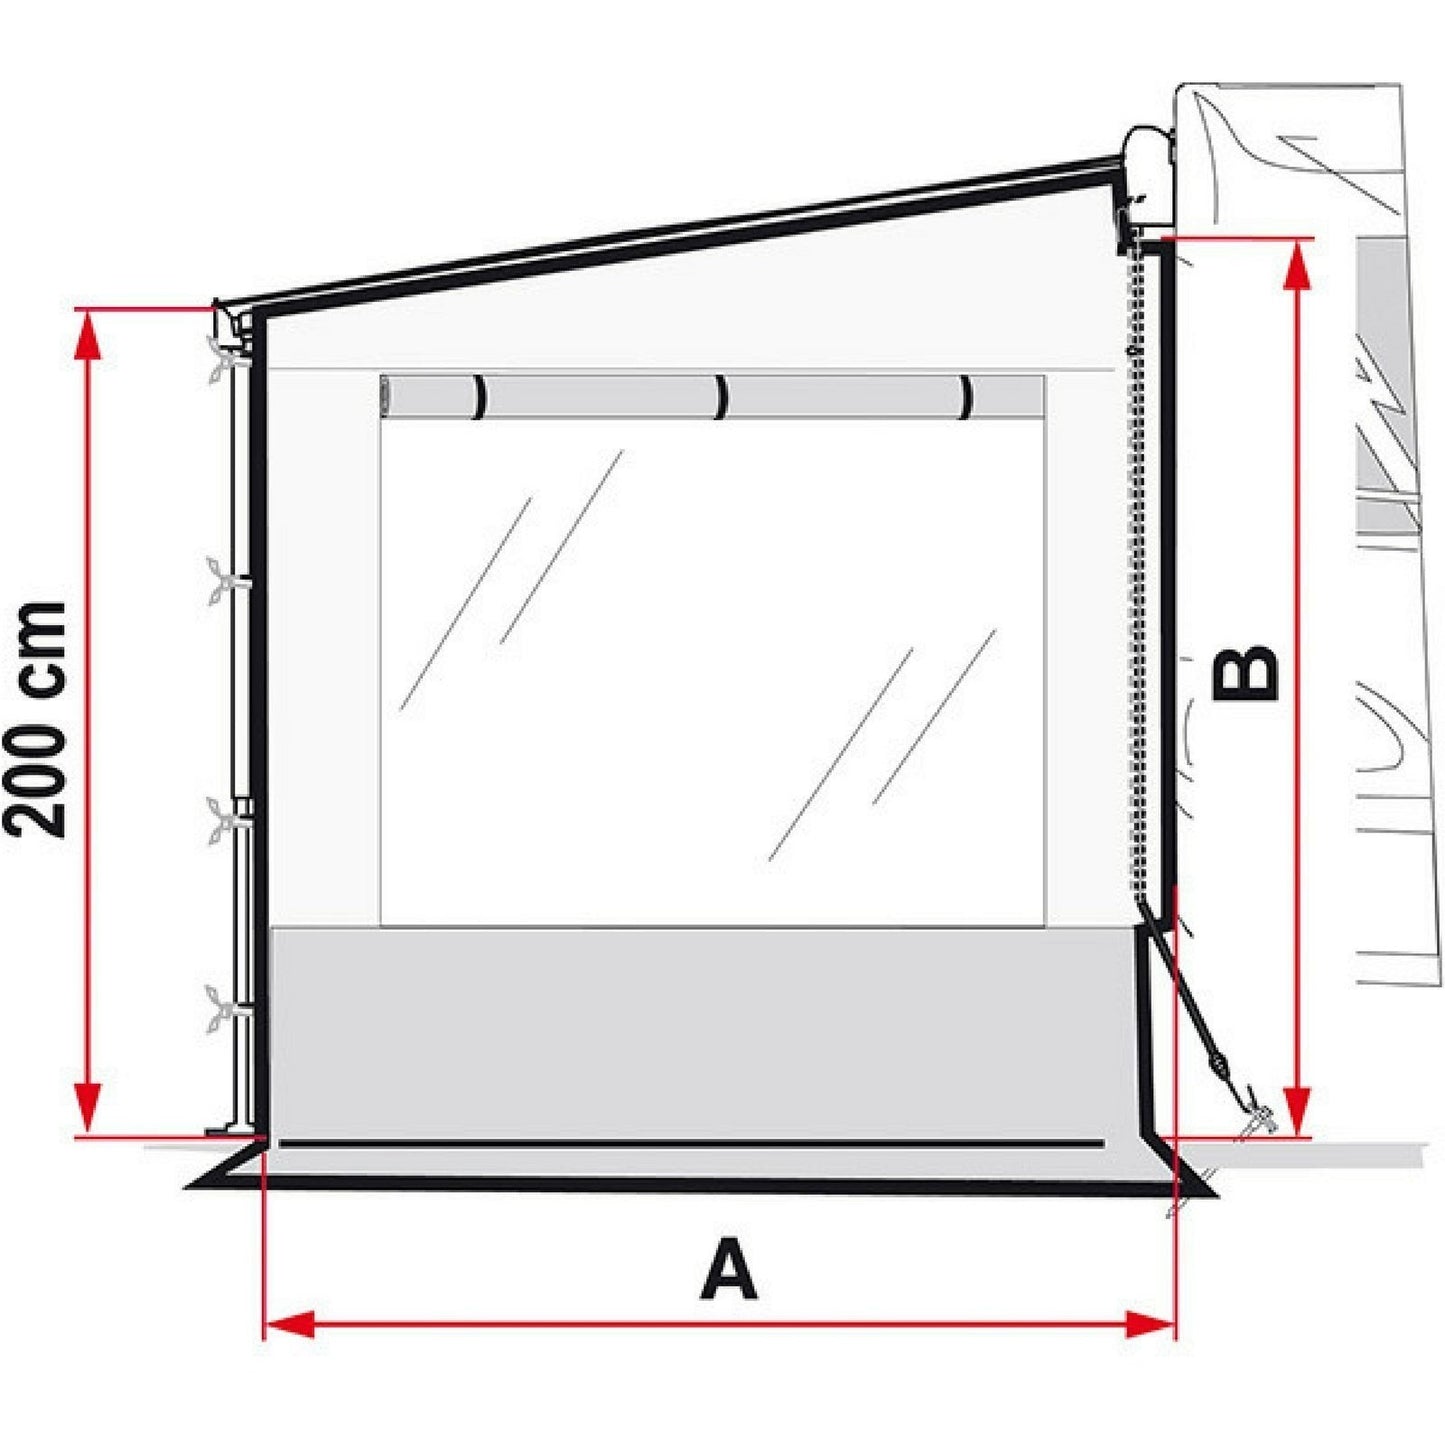 Fiamma Side W Pro Shade Panel made by Fiamma. A Accessories sold by Quality Caravan Awnings